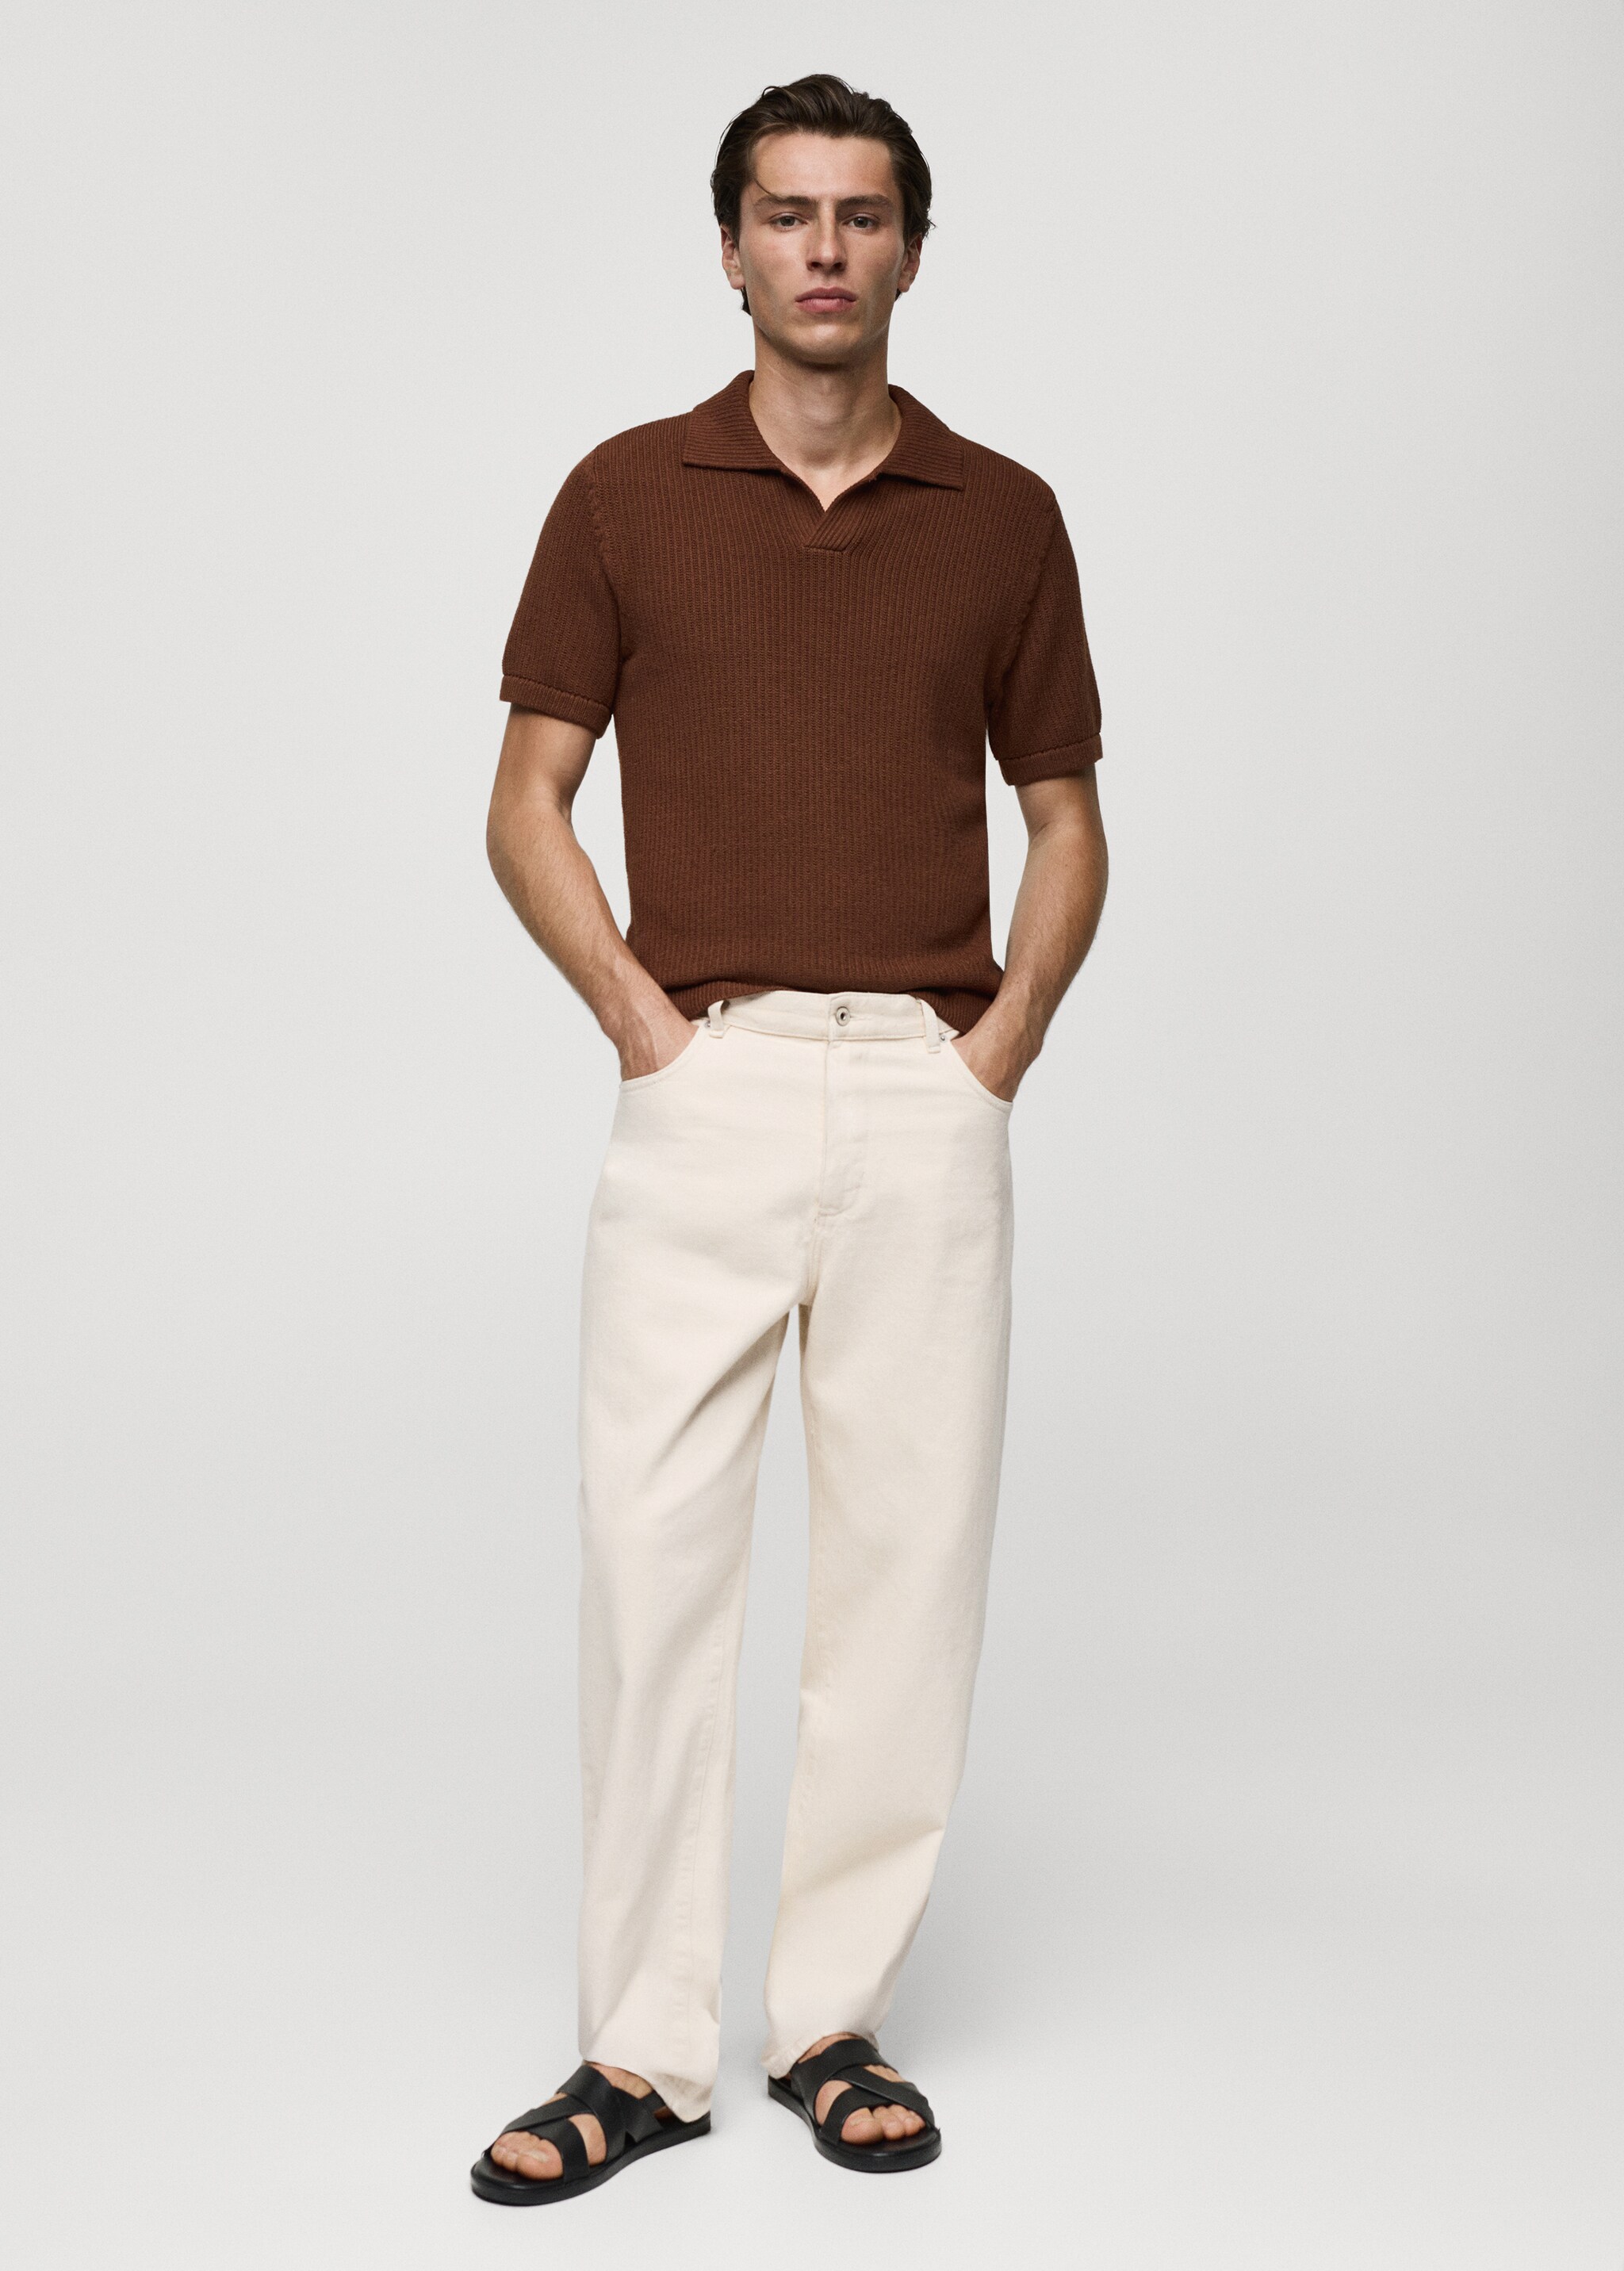 Jeans algodón relaxed fit - Plano general